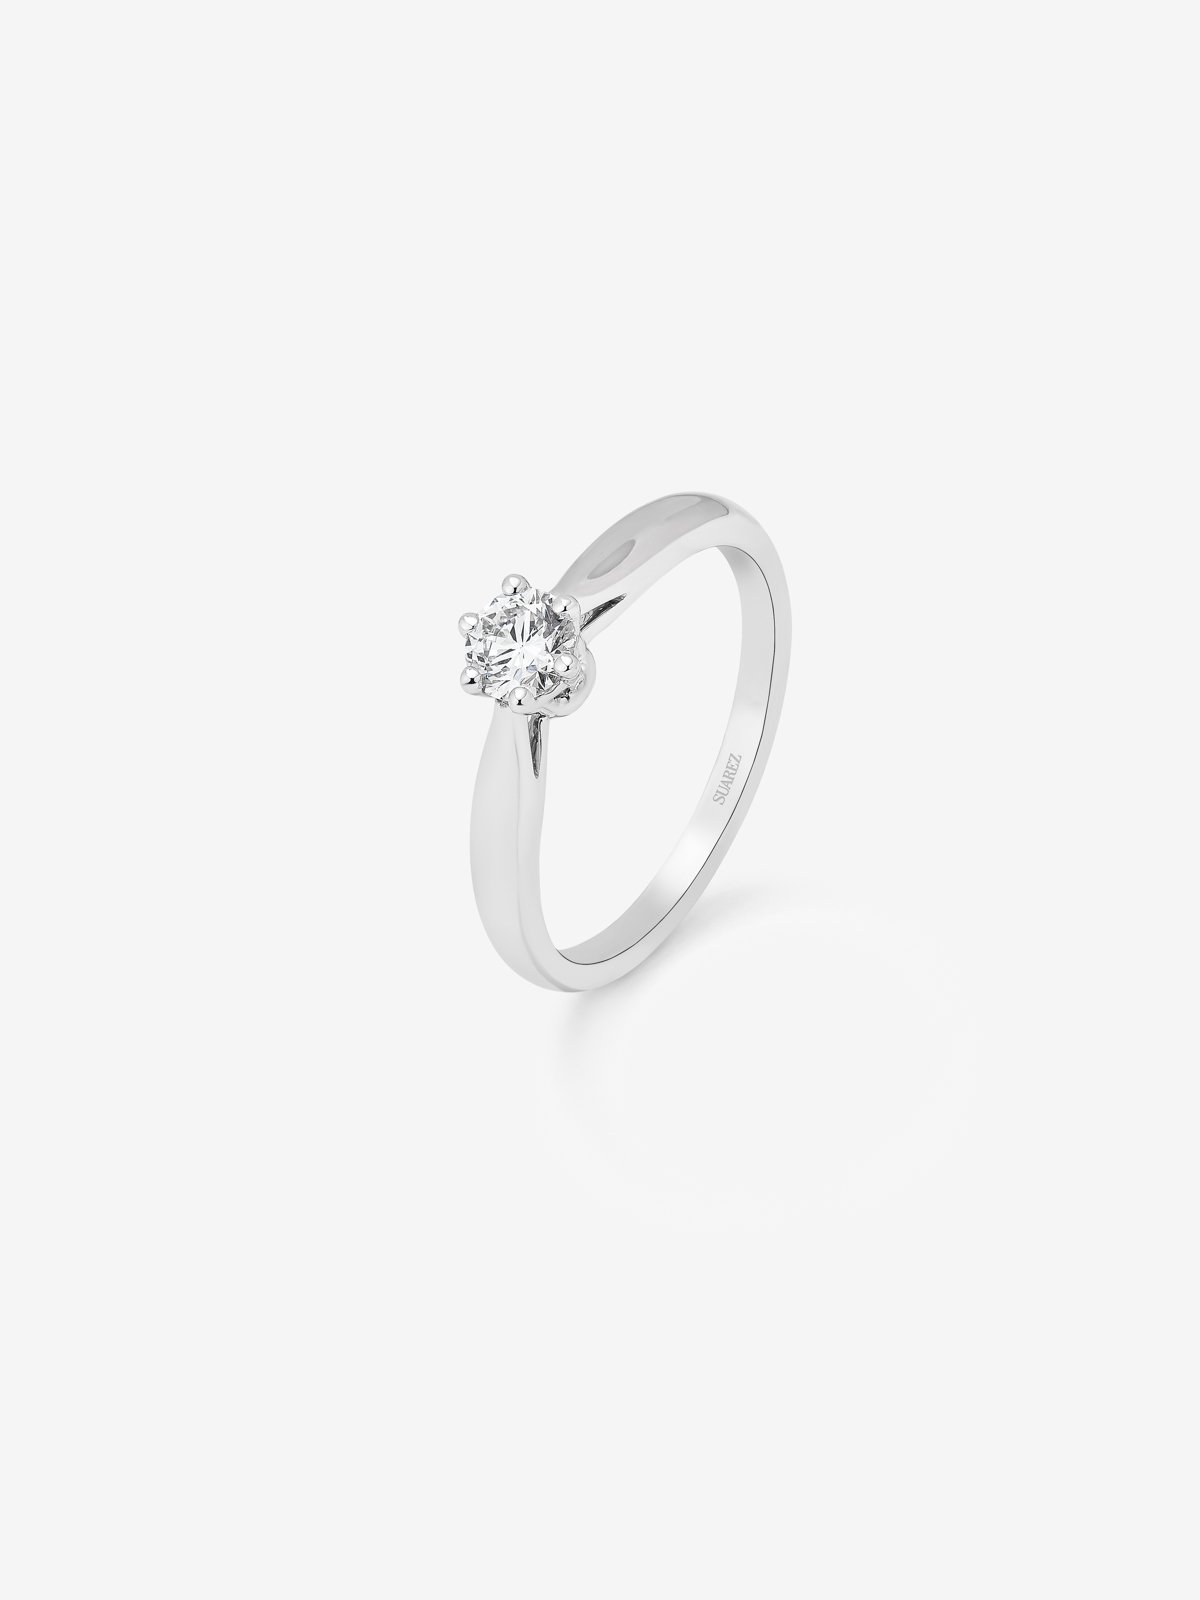 18K white gold compromise ring with 0.3 carat central diamond